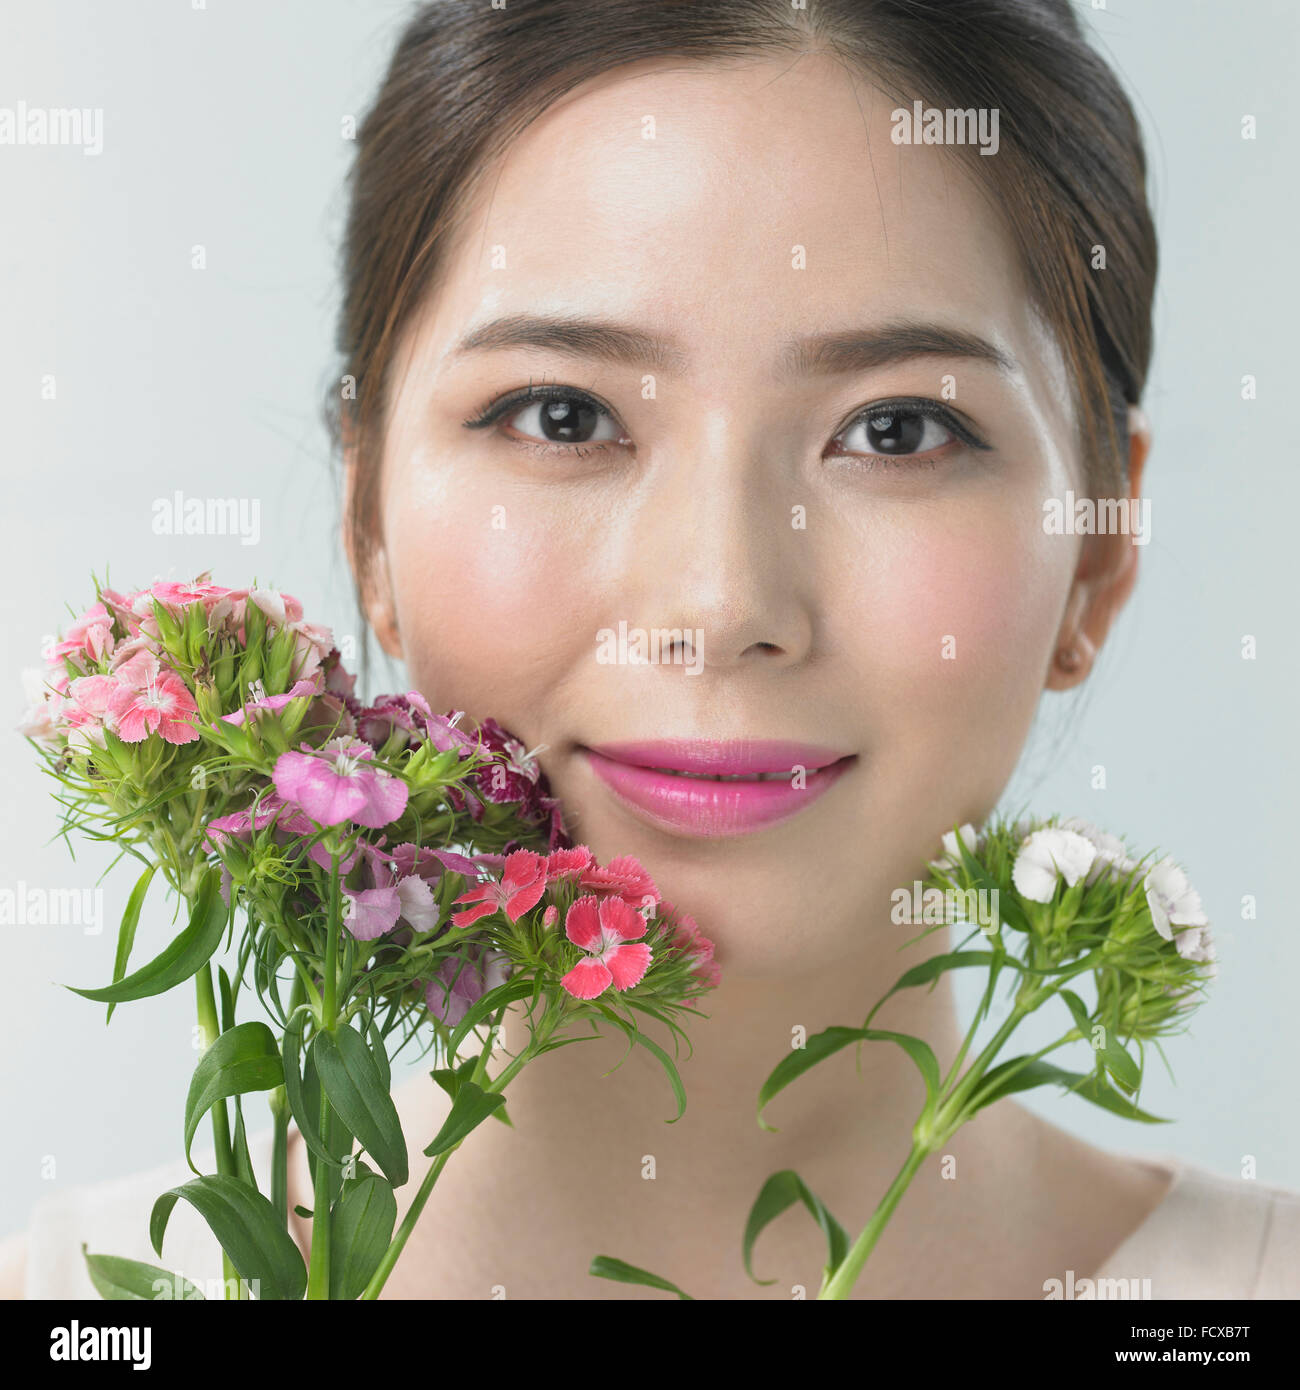 Woman's face with plants with small petals Stock Photo